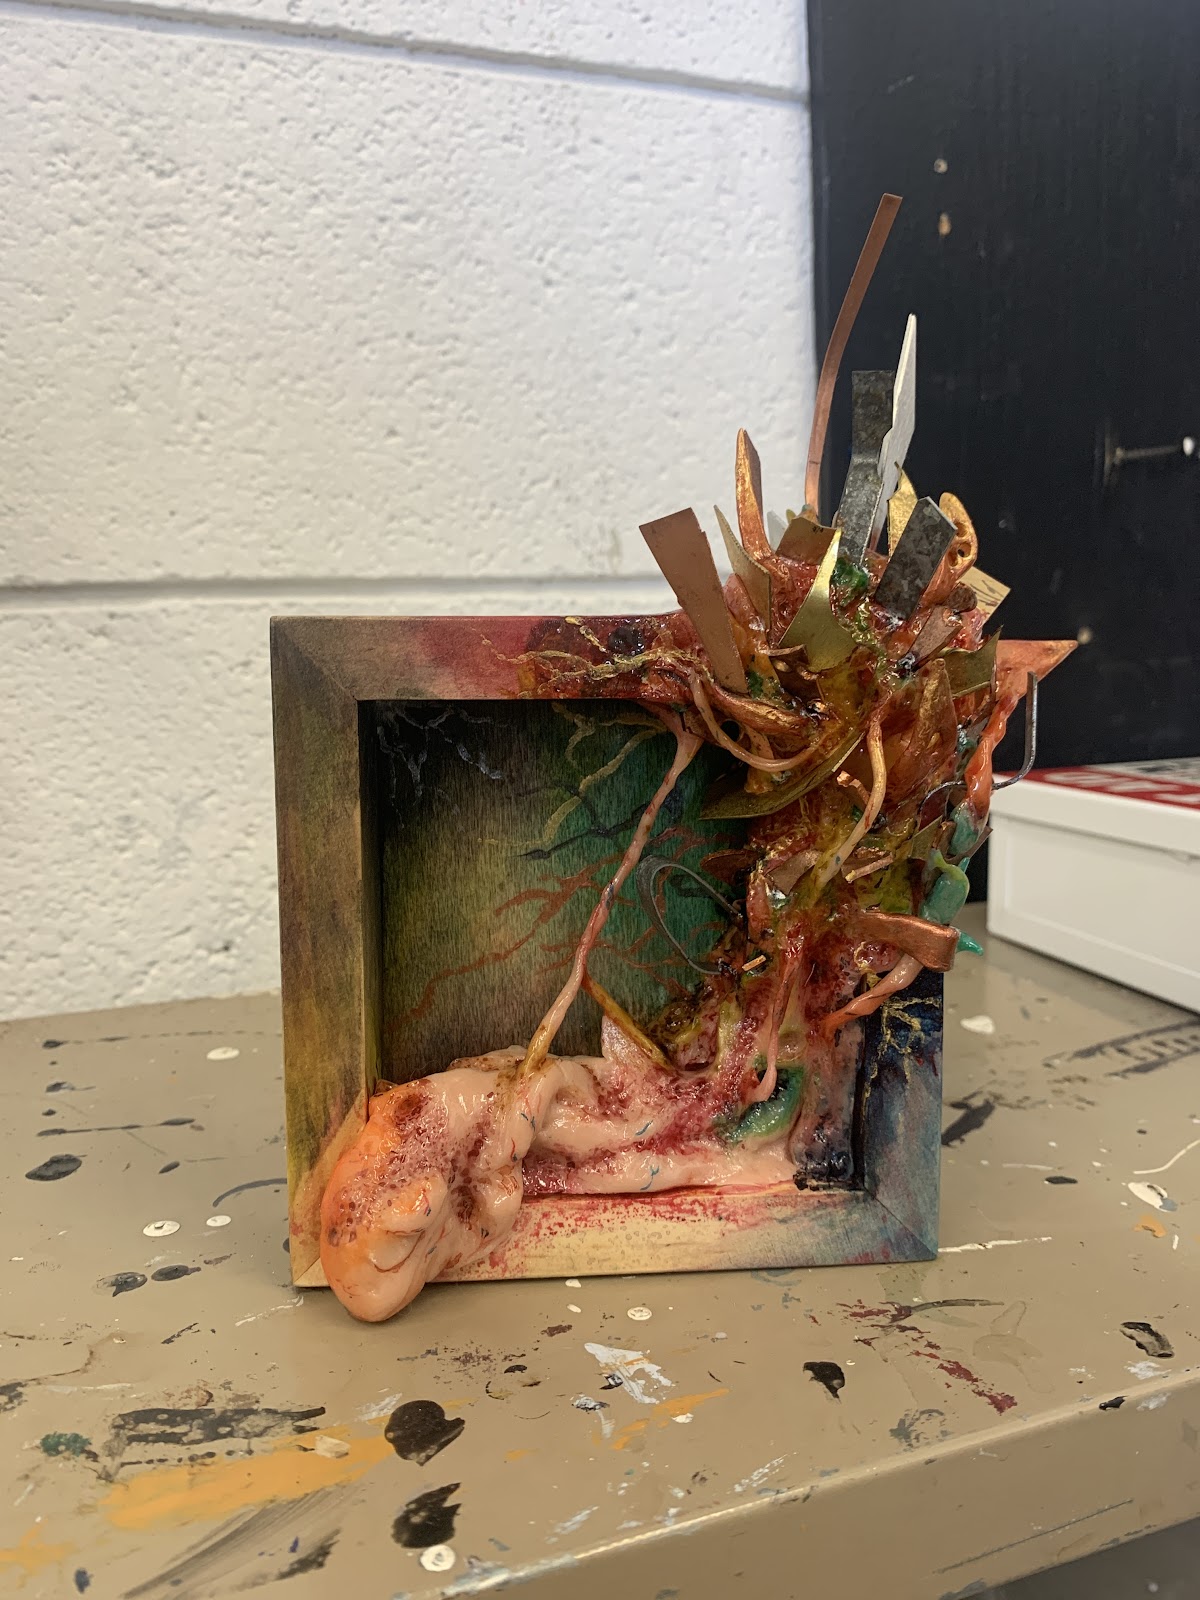 An image of the Oxidation sculpture created by student artist Athena Garron